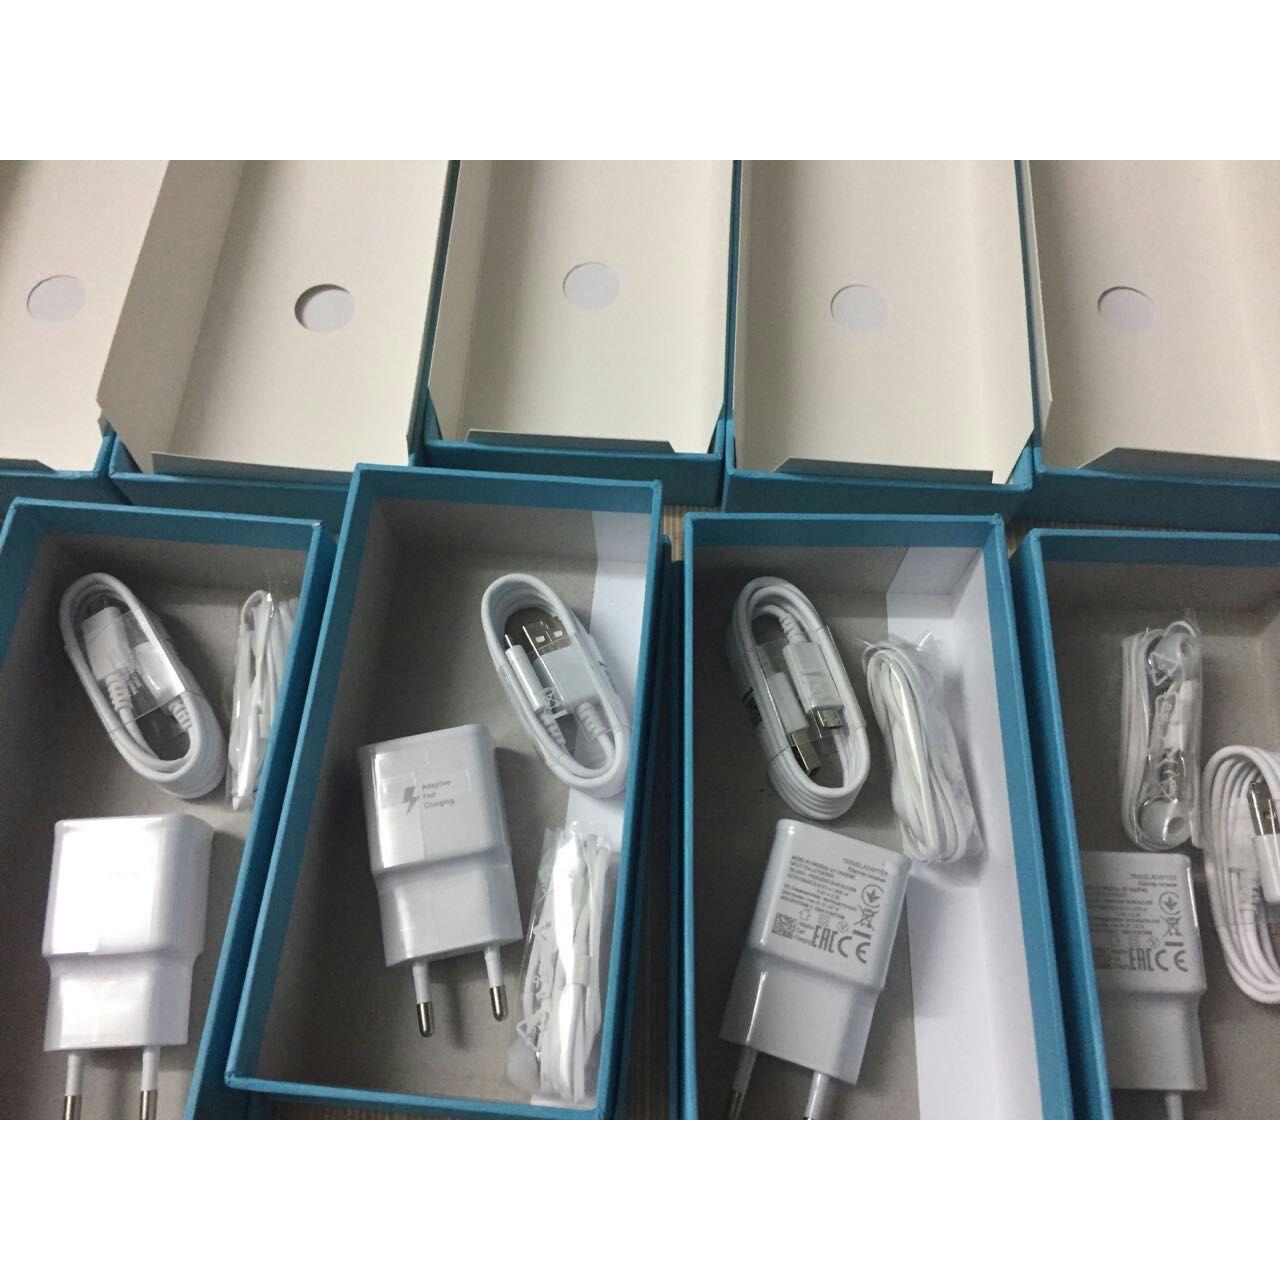 Samsung Android White Plaine Box with Accessori Wholesale Suppliers